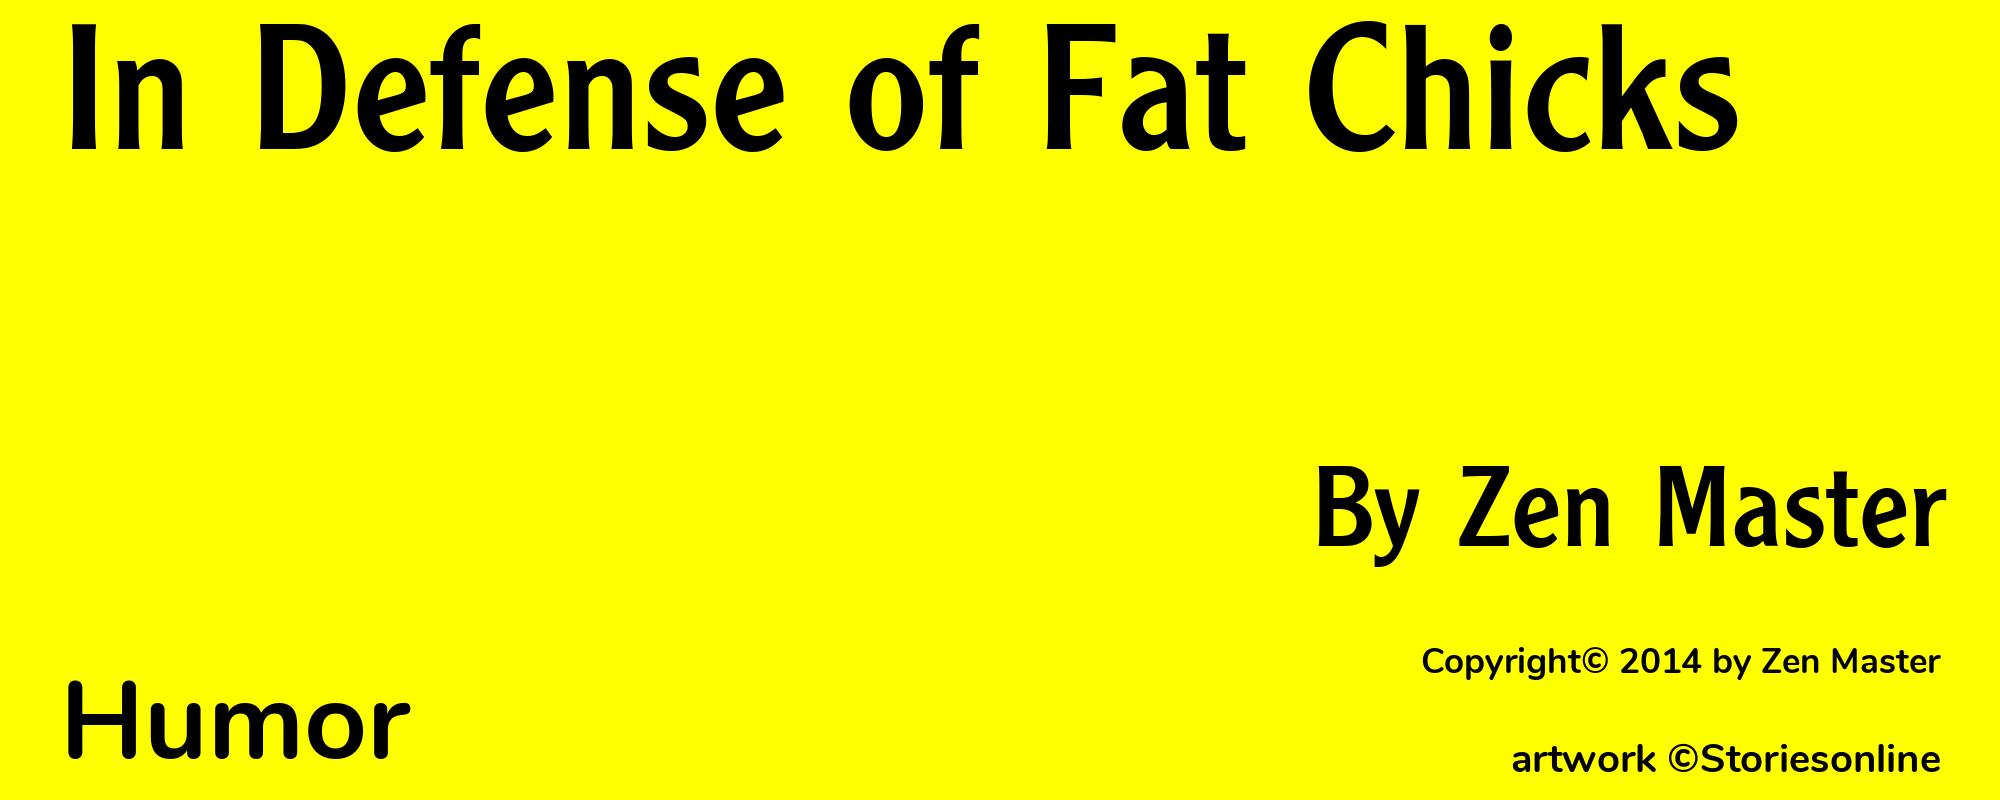 In Defense of Fat Chicks - Cover